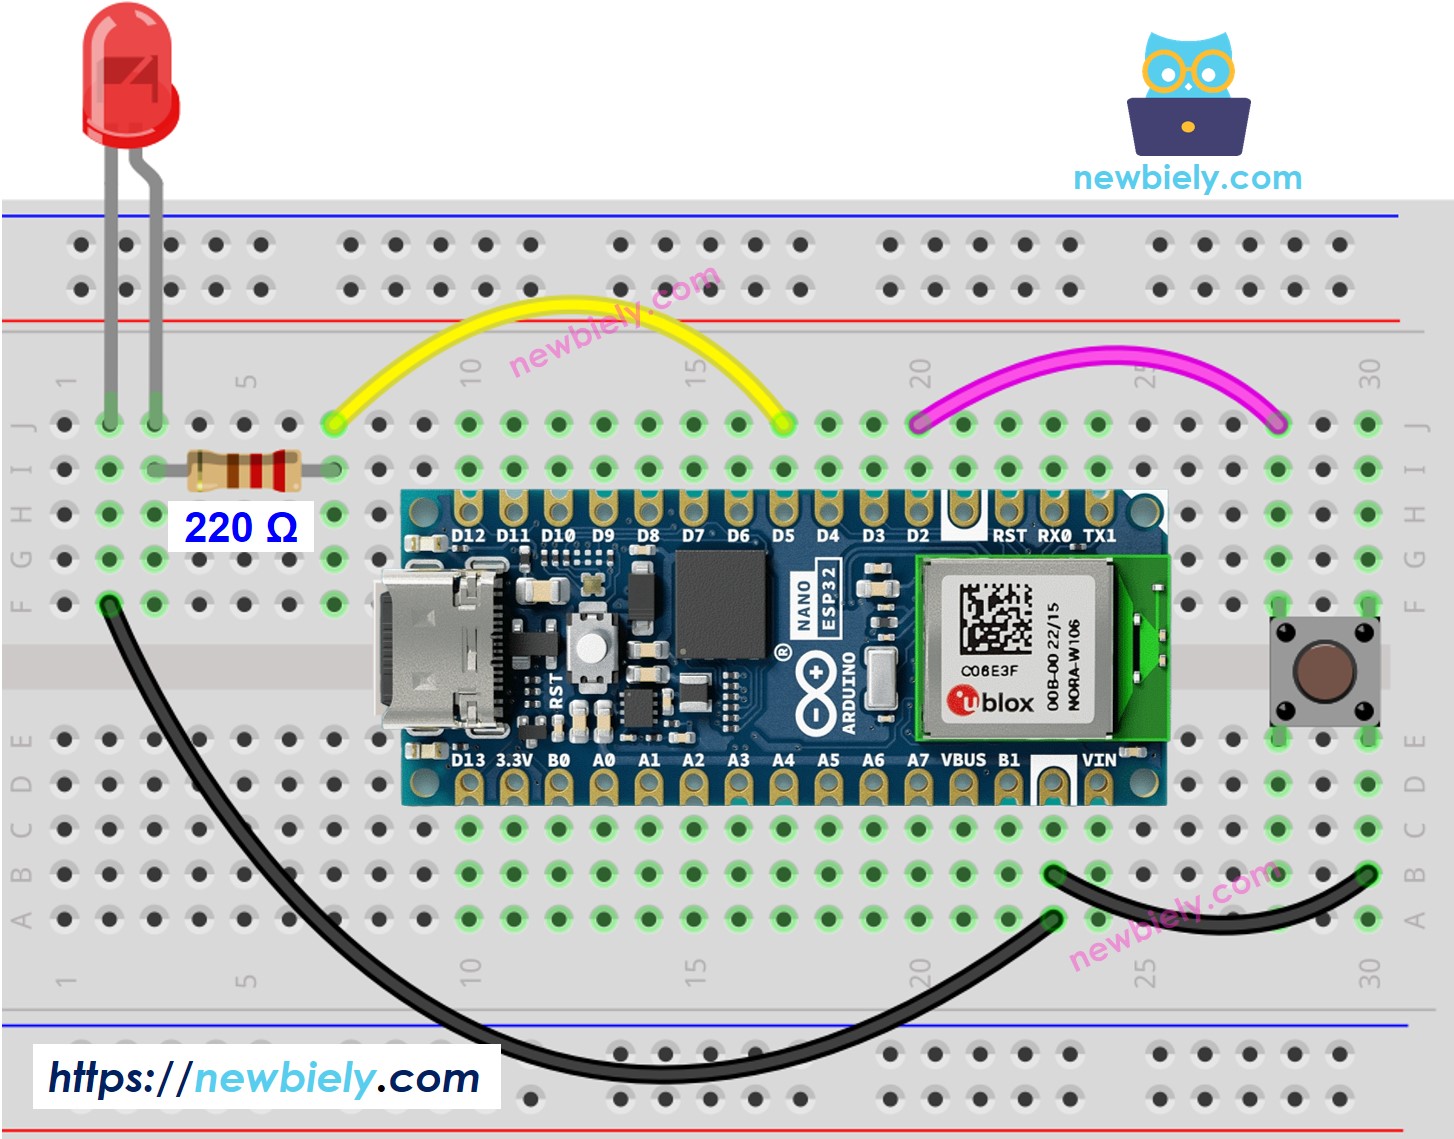 The wiring diagram between Arduino Nano ESP32 and Button LED